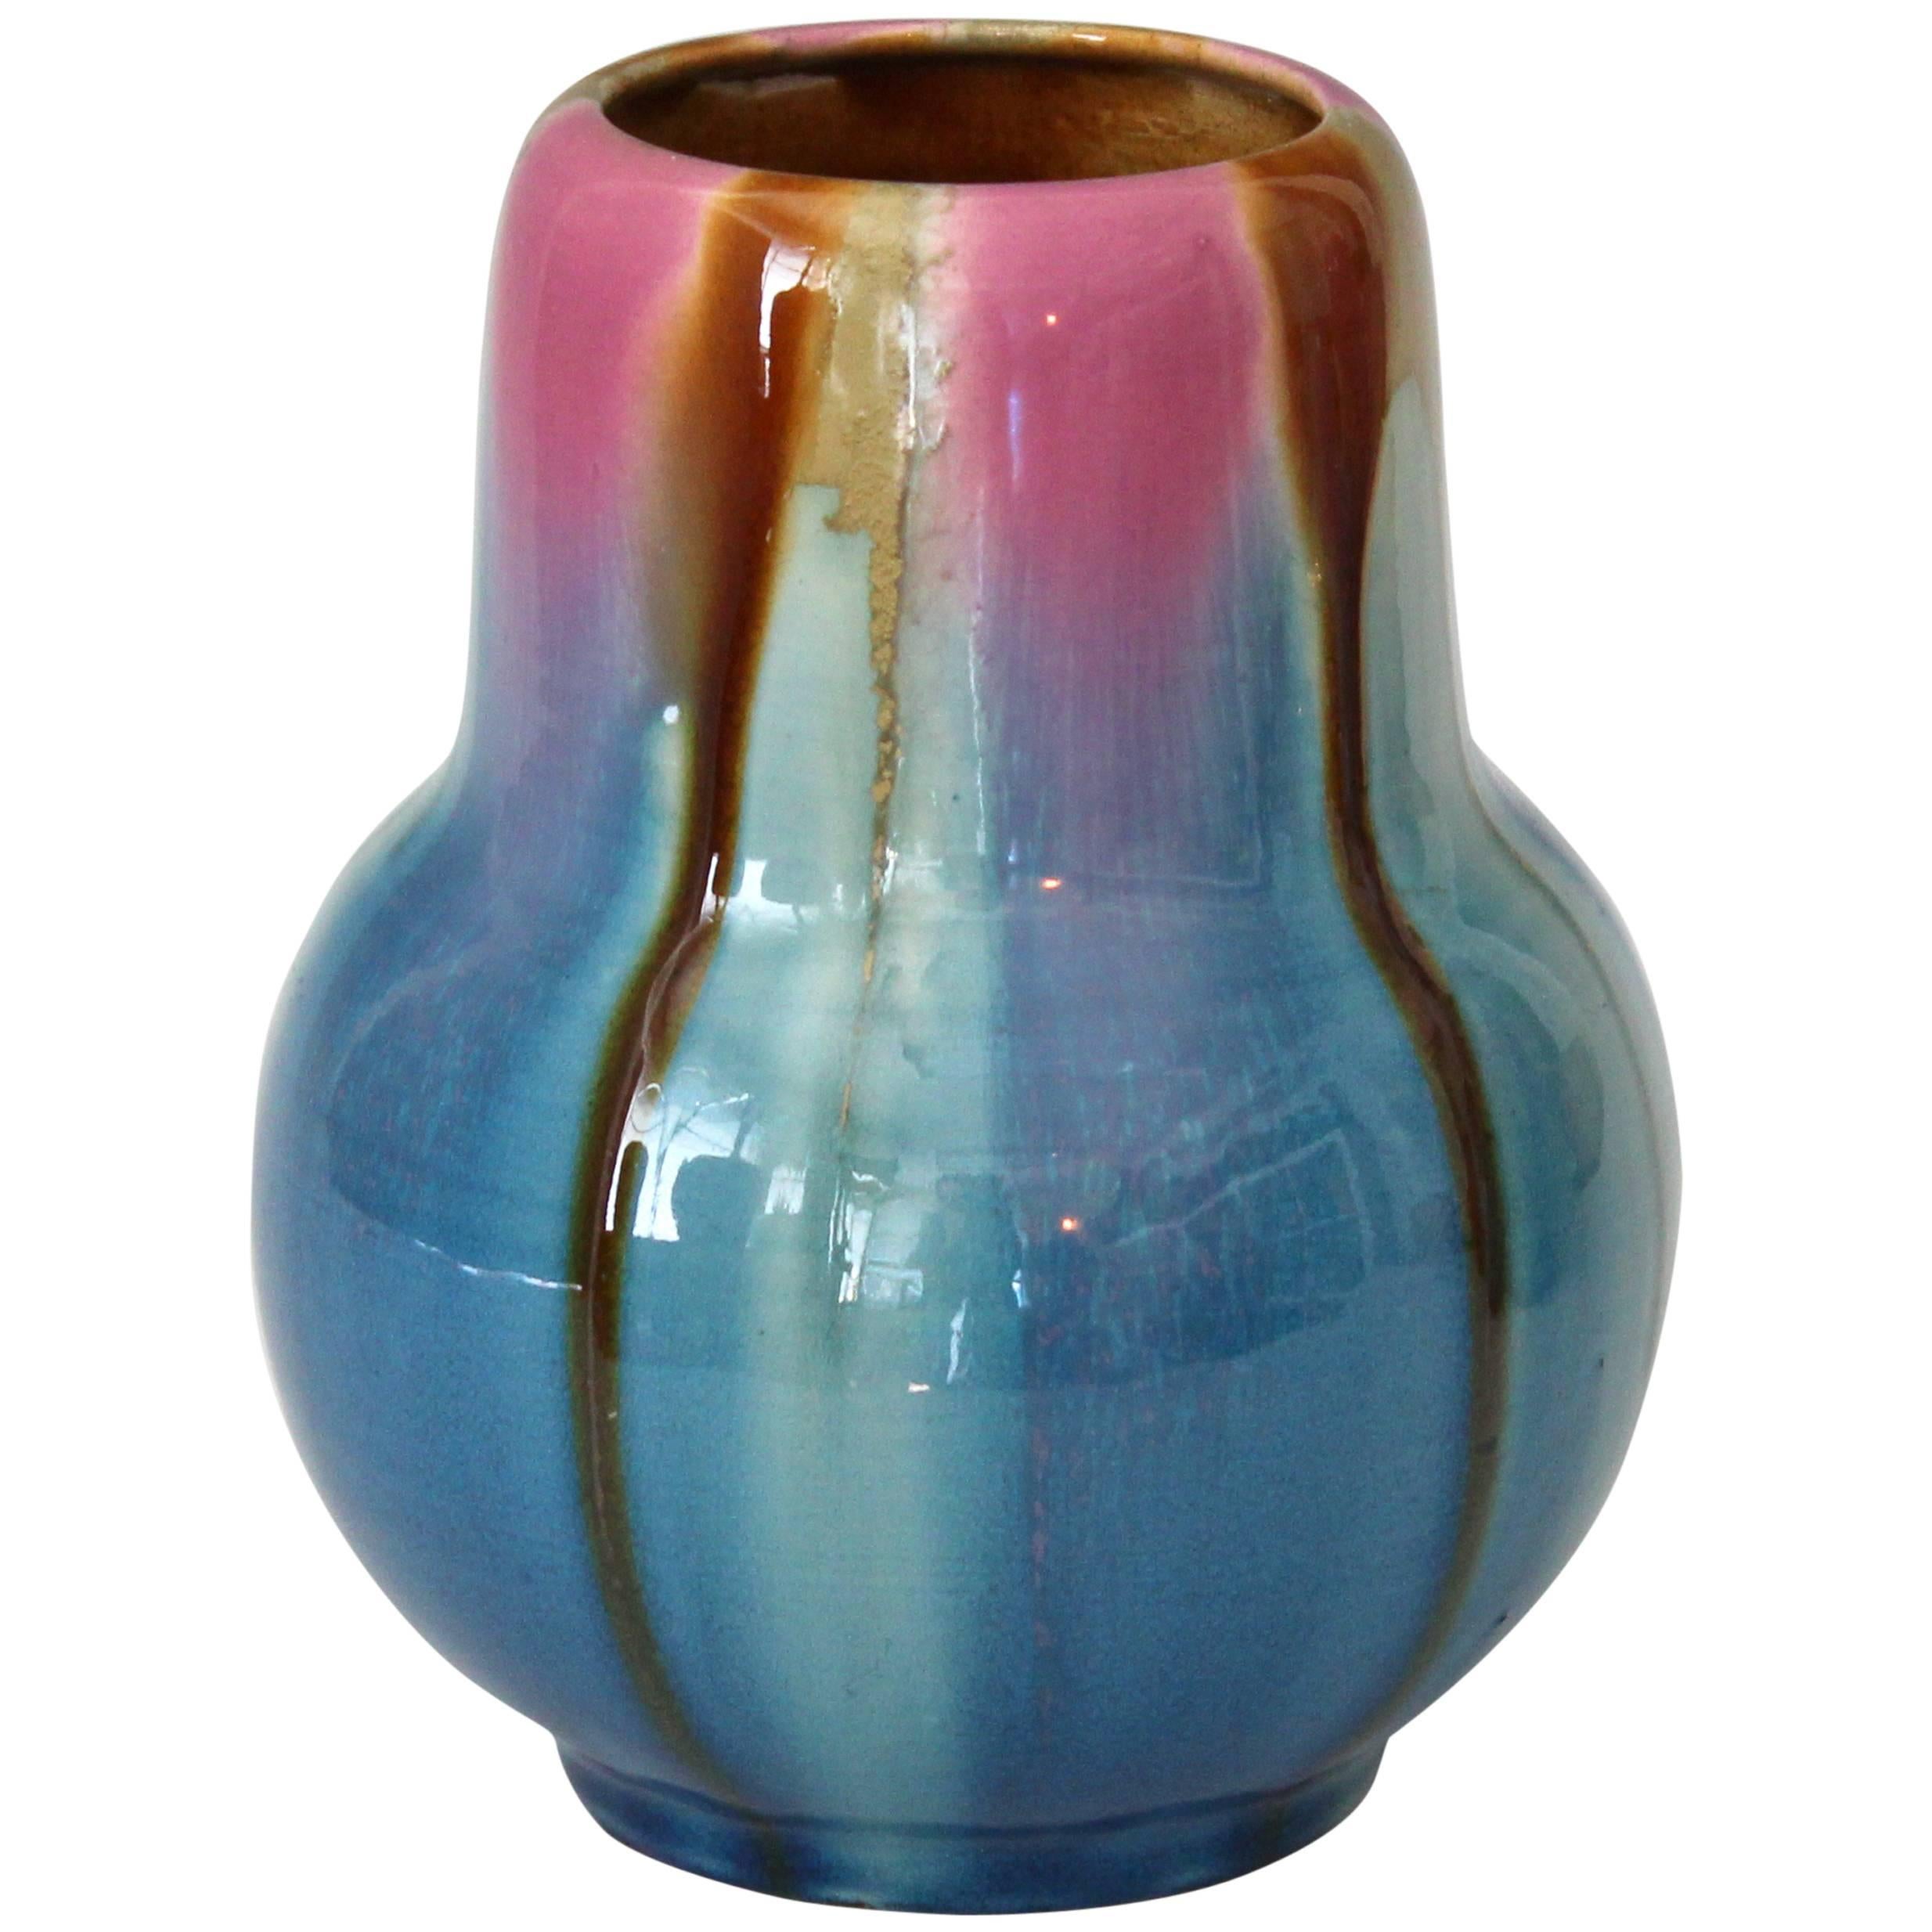 Awaji Pottery Art Deco Vase in Pink and Blue Flambe Glaze For Sale